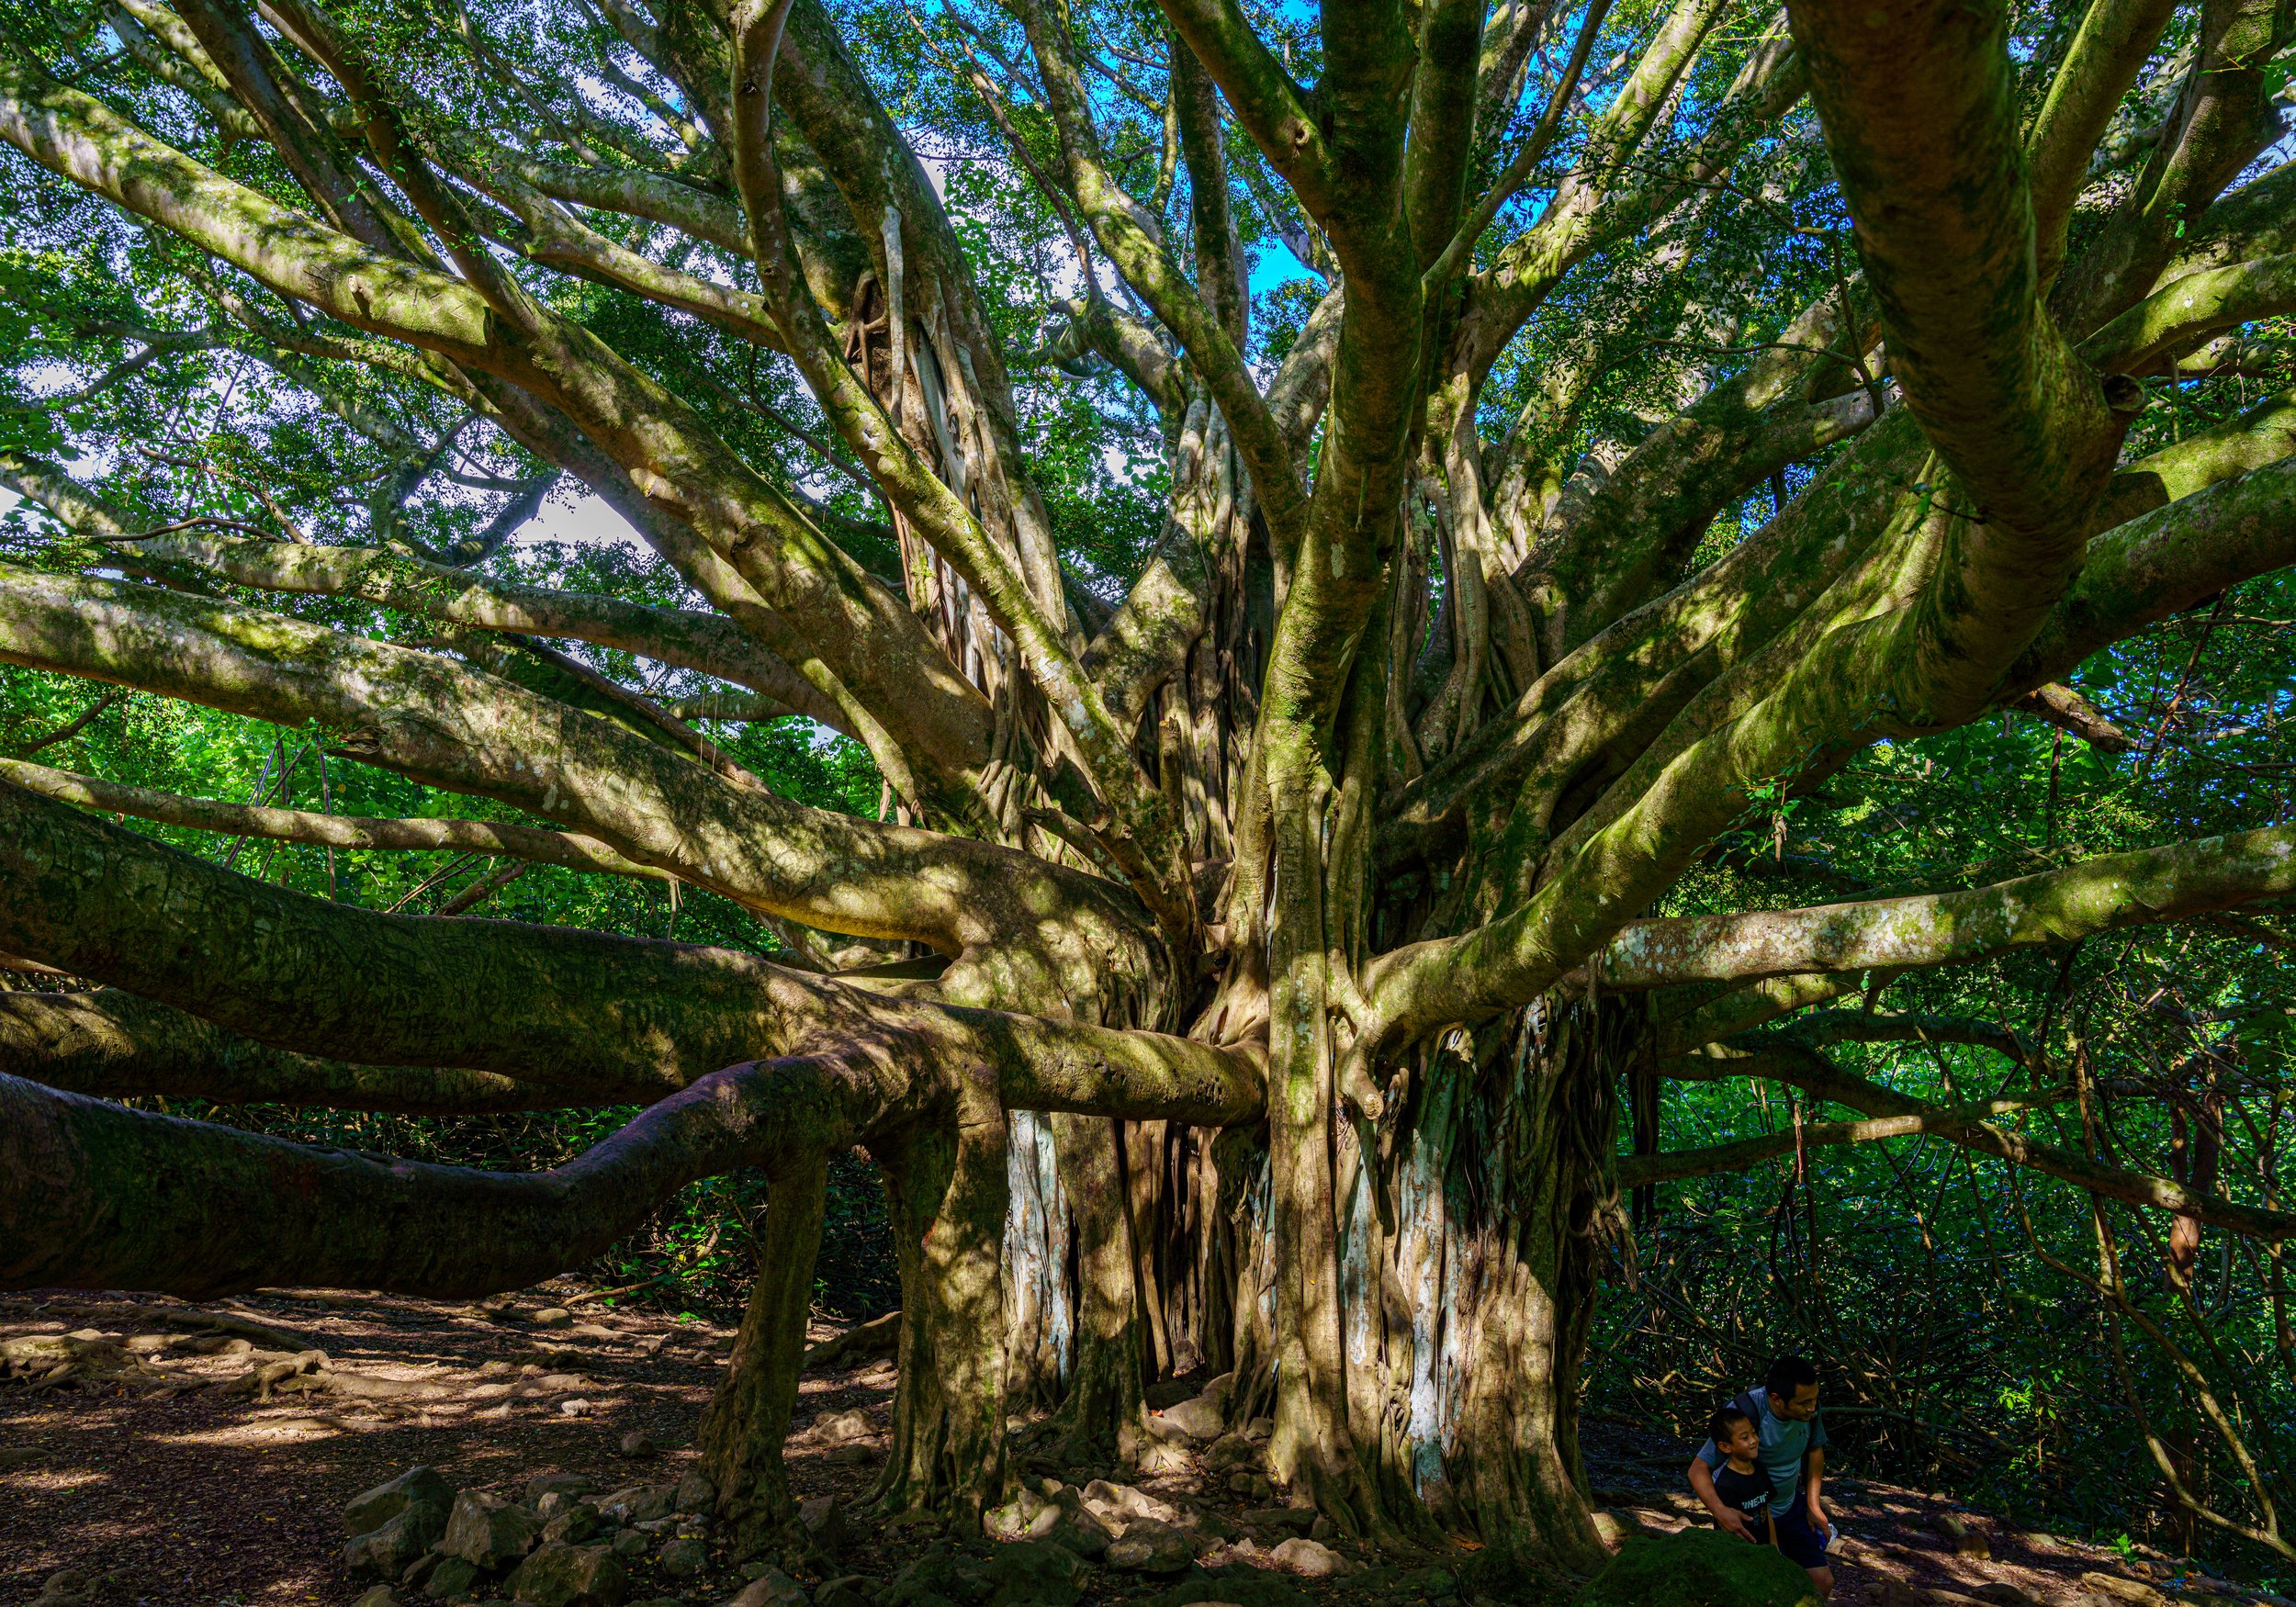  An amazing Banyan tree on the trail 